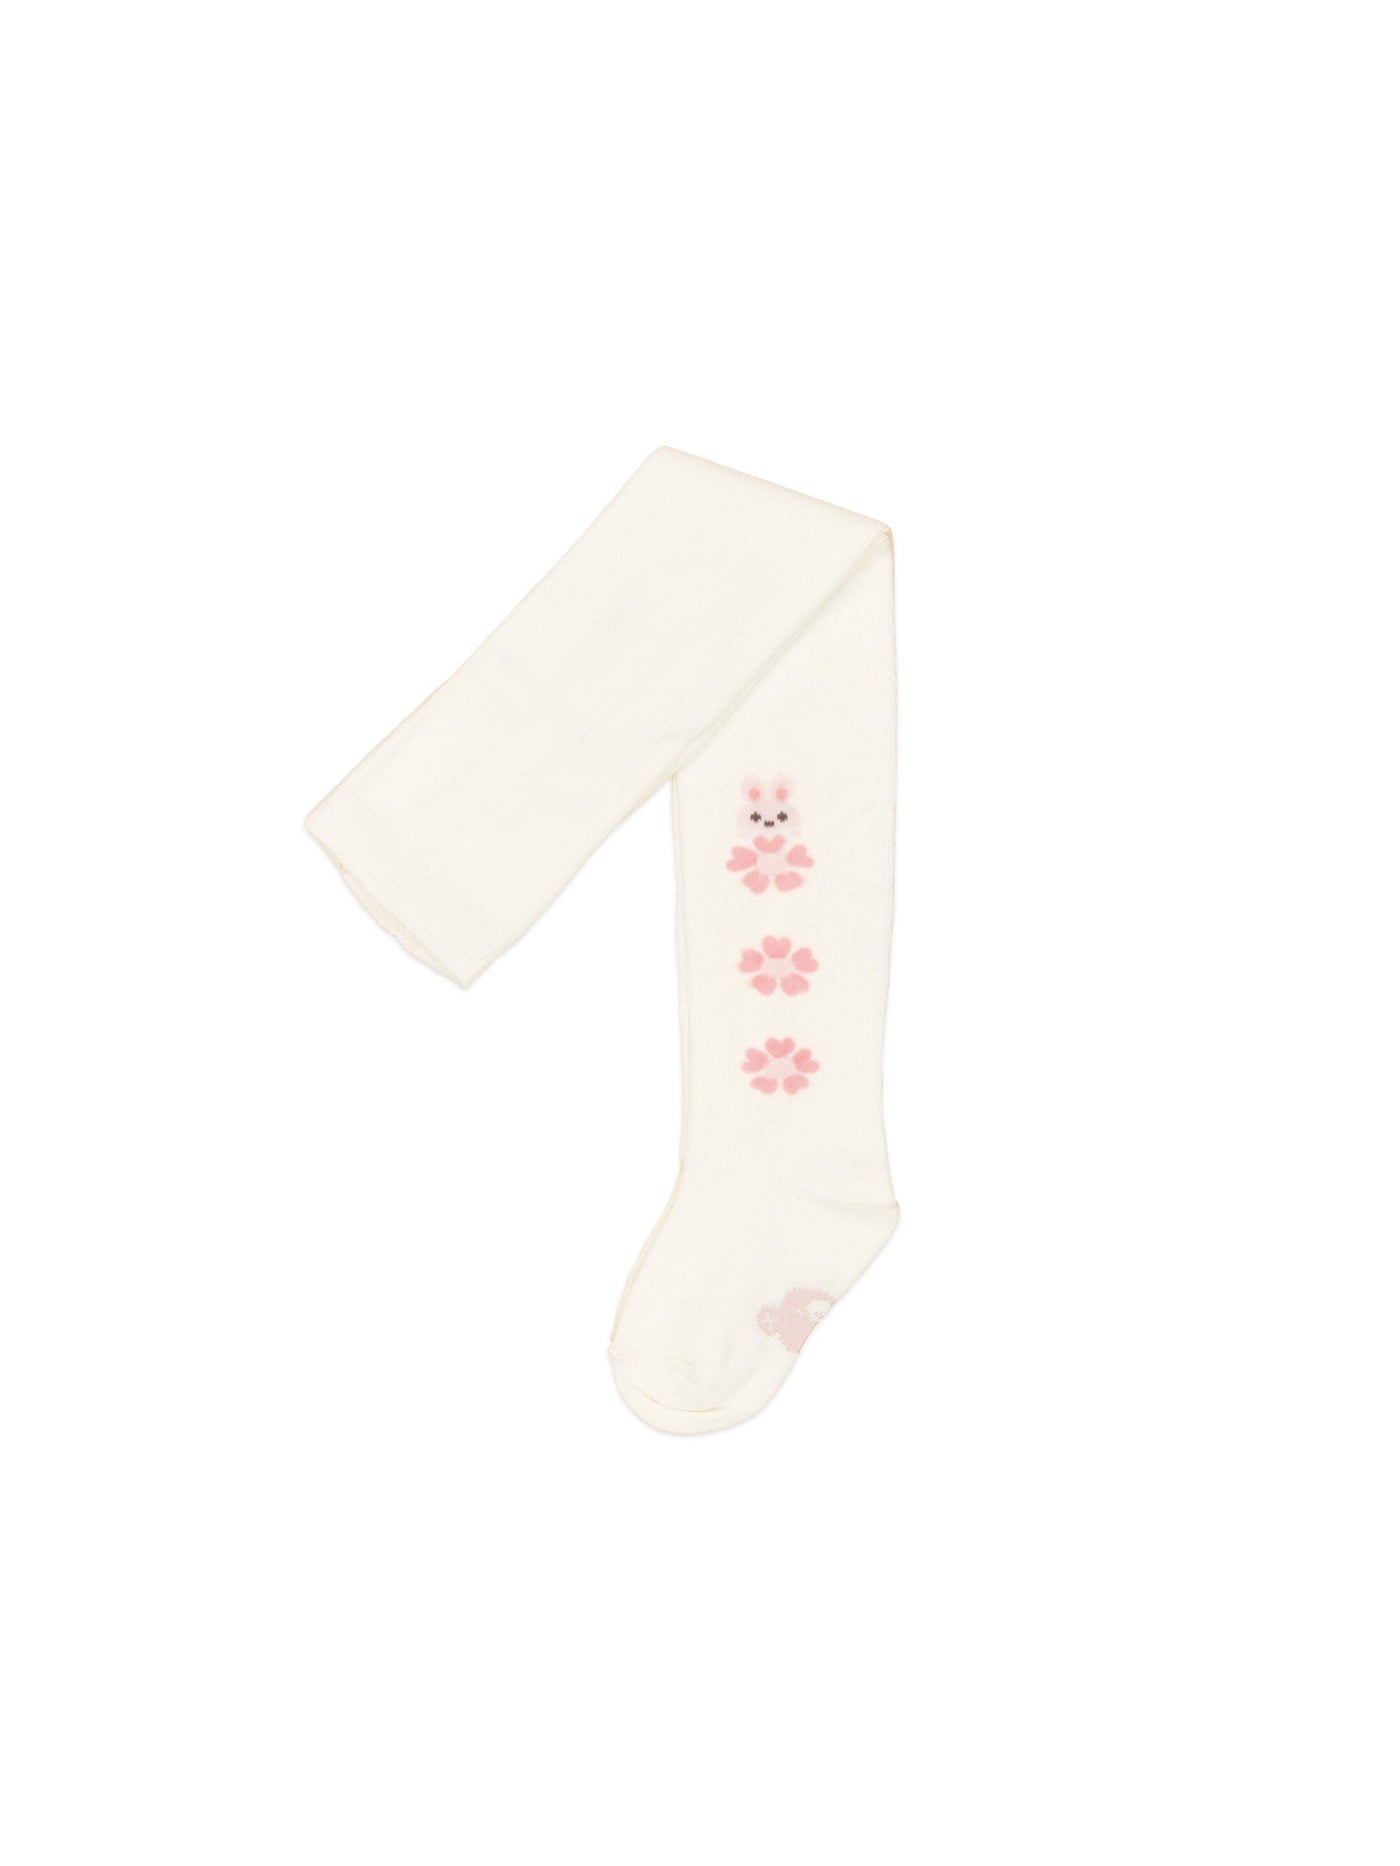 Huxbaby Bunny Flower Tights HB8020W24 Tights Huxbaby 